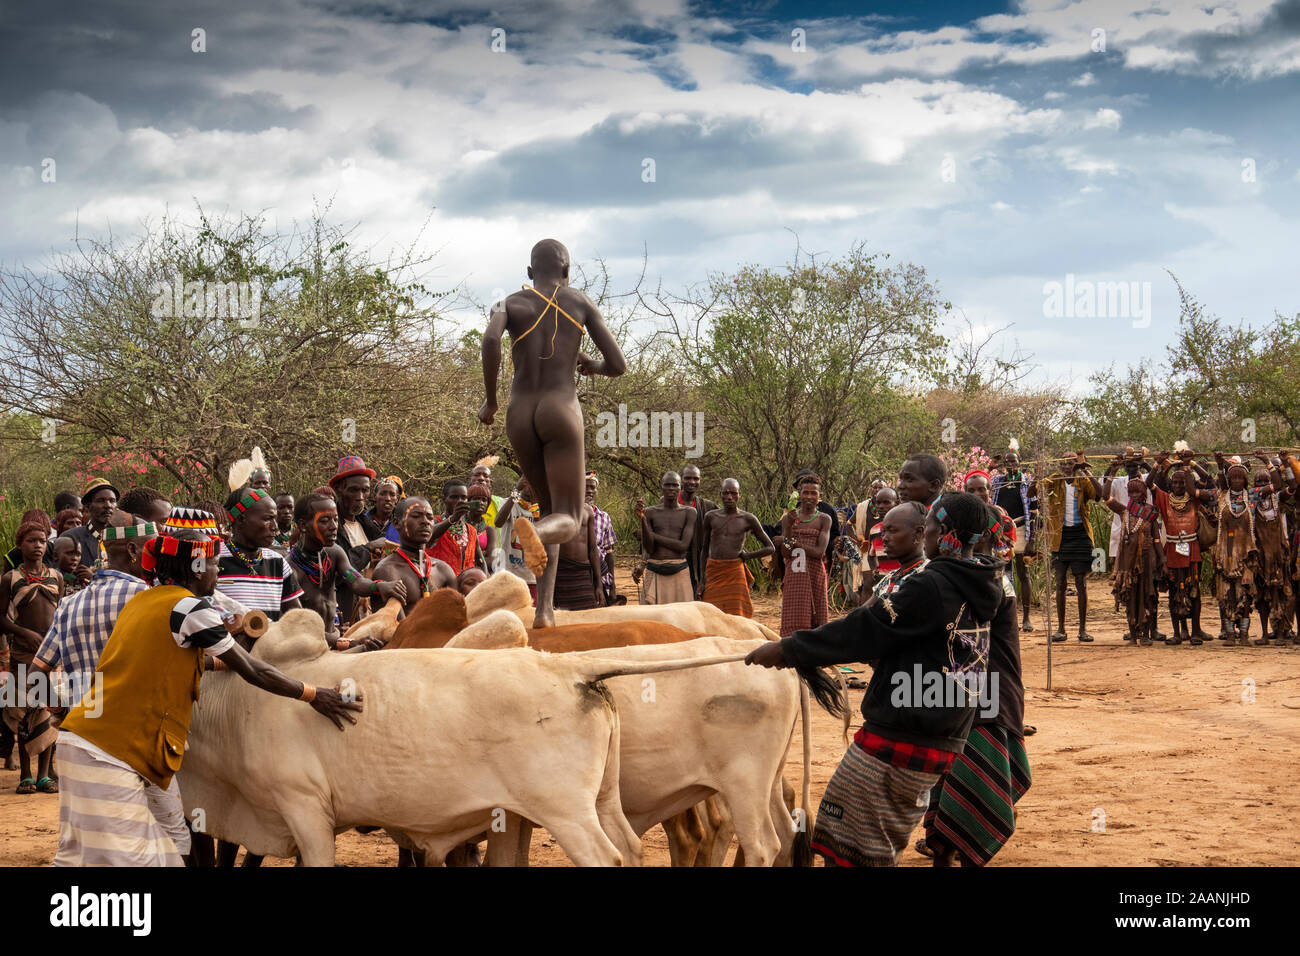 Ethiopia, South Omo, Turmi, bull jumping ceremony, naked Hamar man leaping over bulls from behind Stock Photo